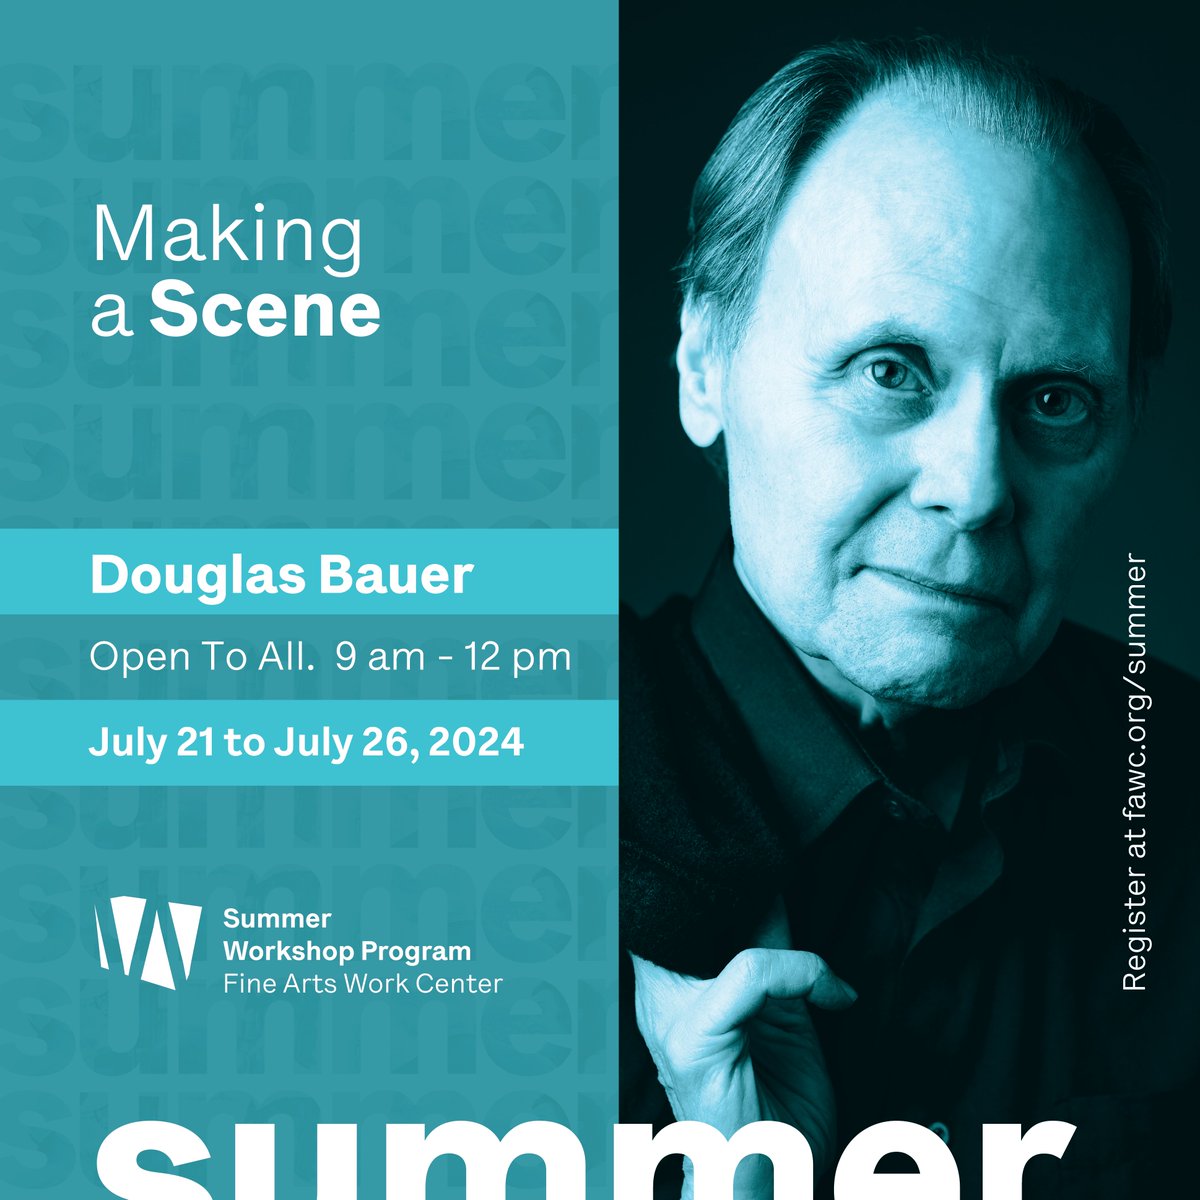 Attention all fiction writers: My former client Douglas Bauer (THE BECKONING WORLD) will be leading a workshop on 'Making a Scene' at @FAWCCapeCod in Provincetown 7/21-7/26. You can register for it here: bit.ly/43qlFqk. He's the best and tuition assistance is available!